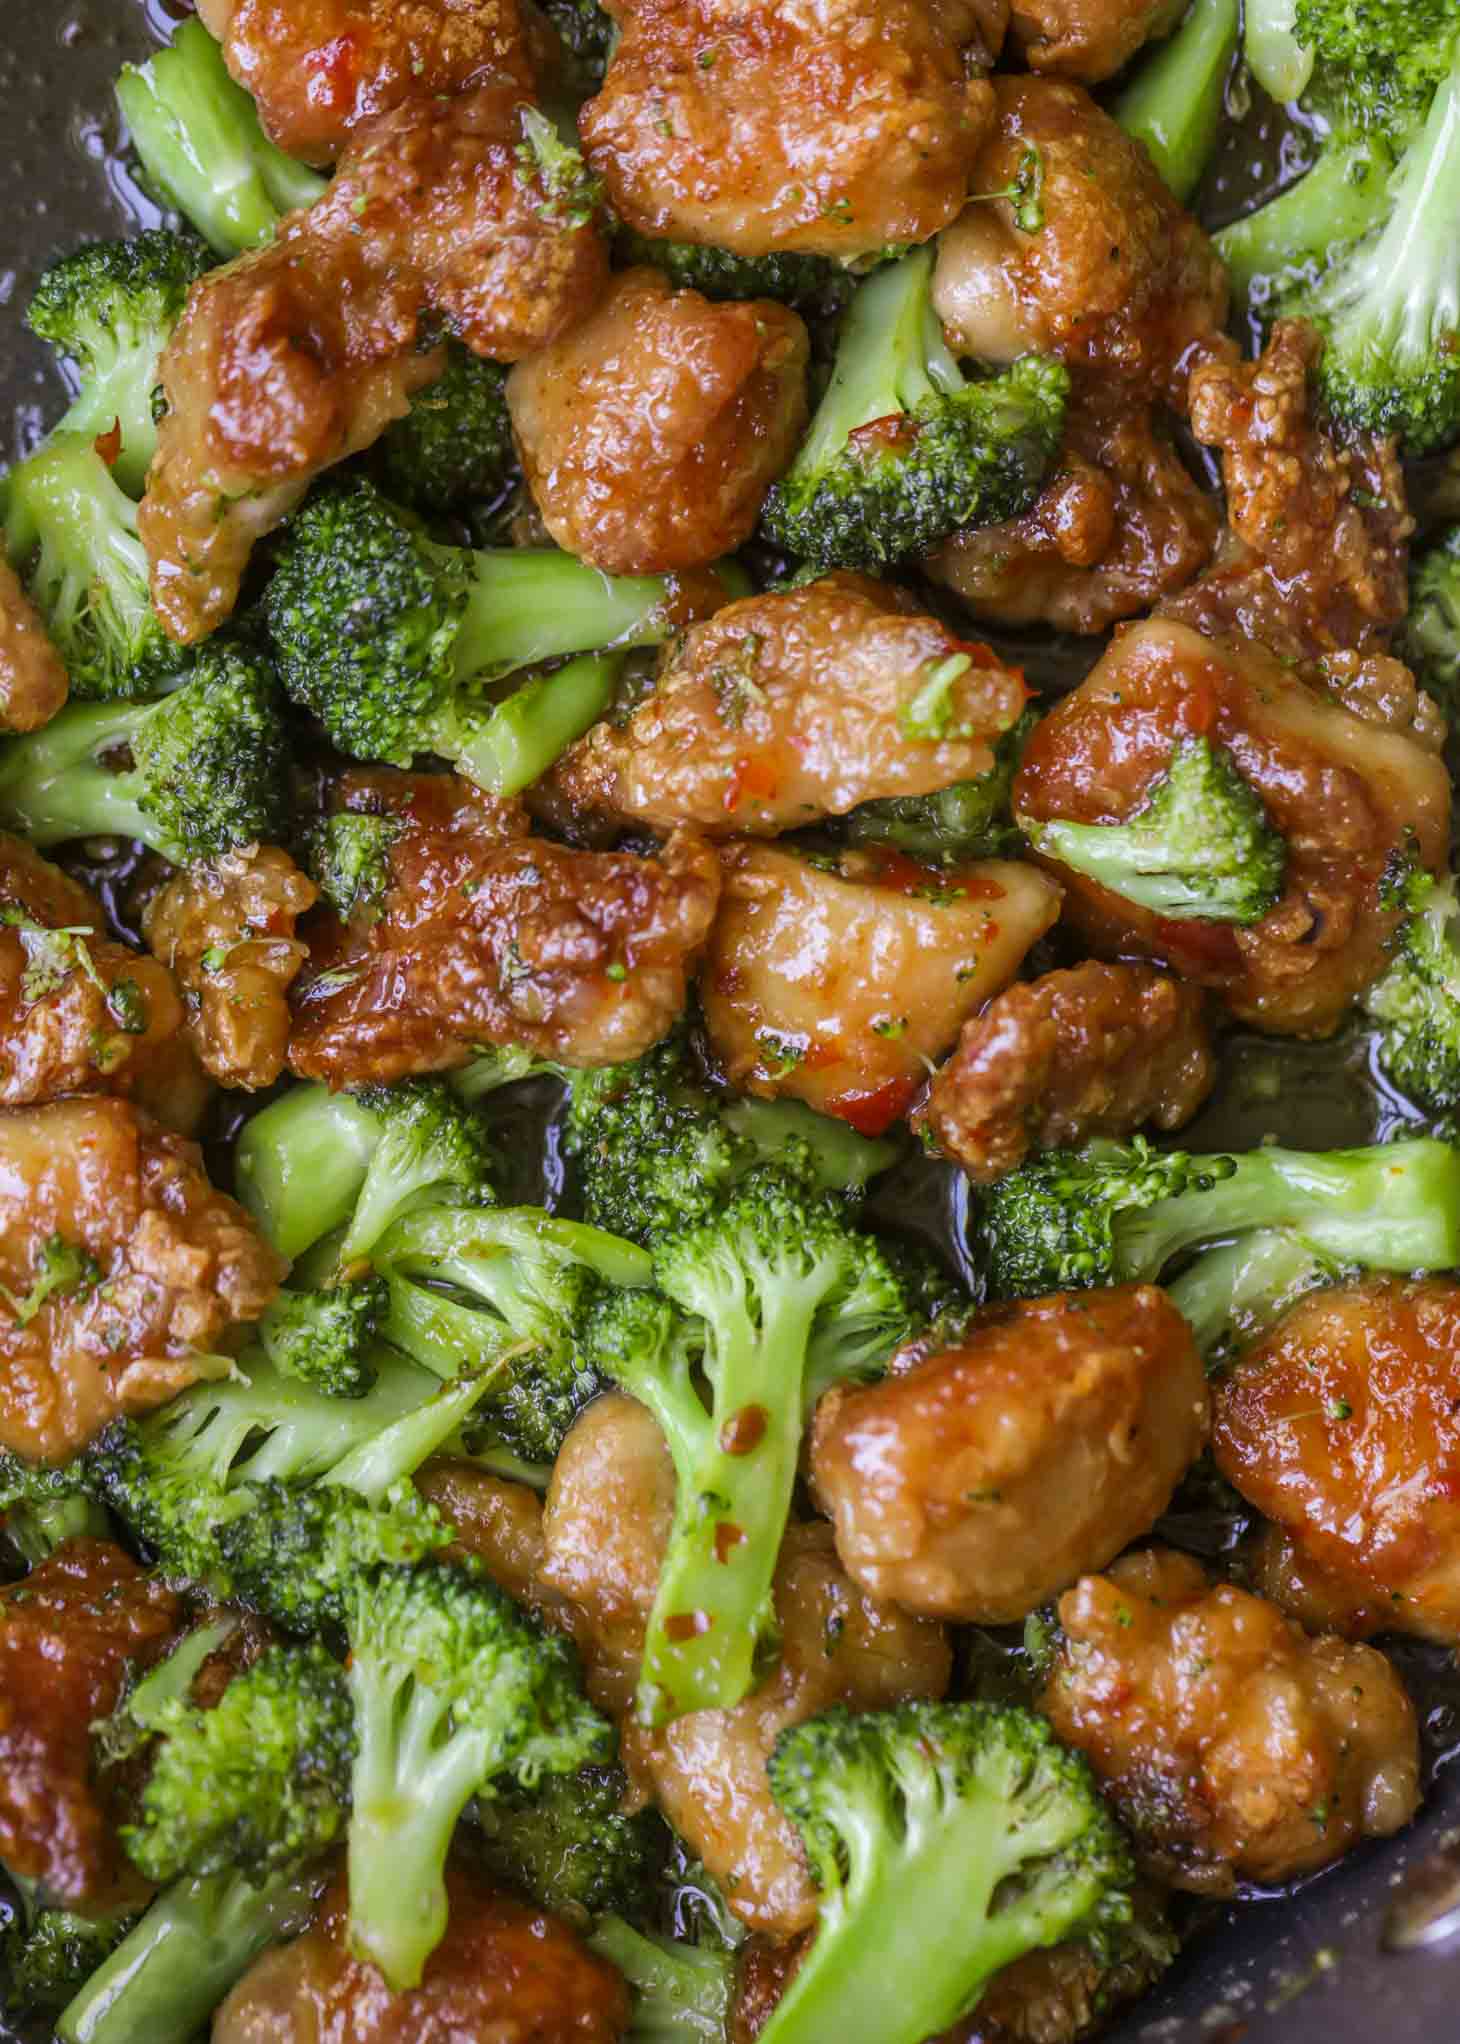 A close up of chicken and broccoli cooking in a pan.